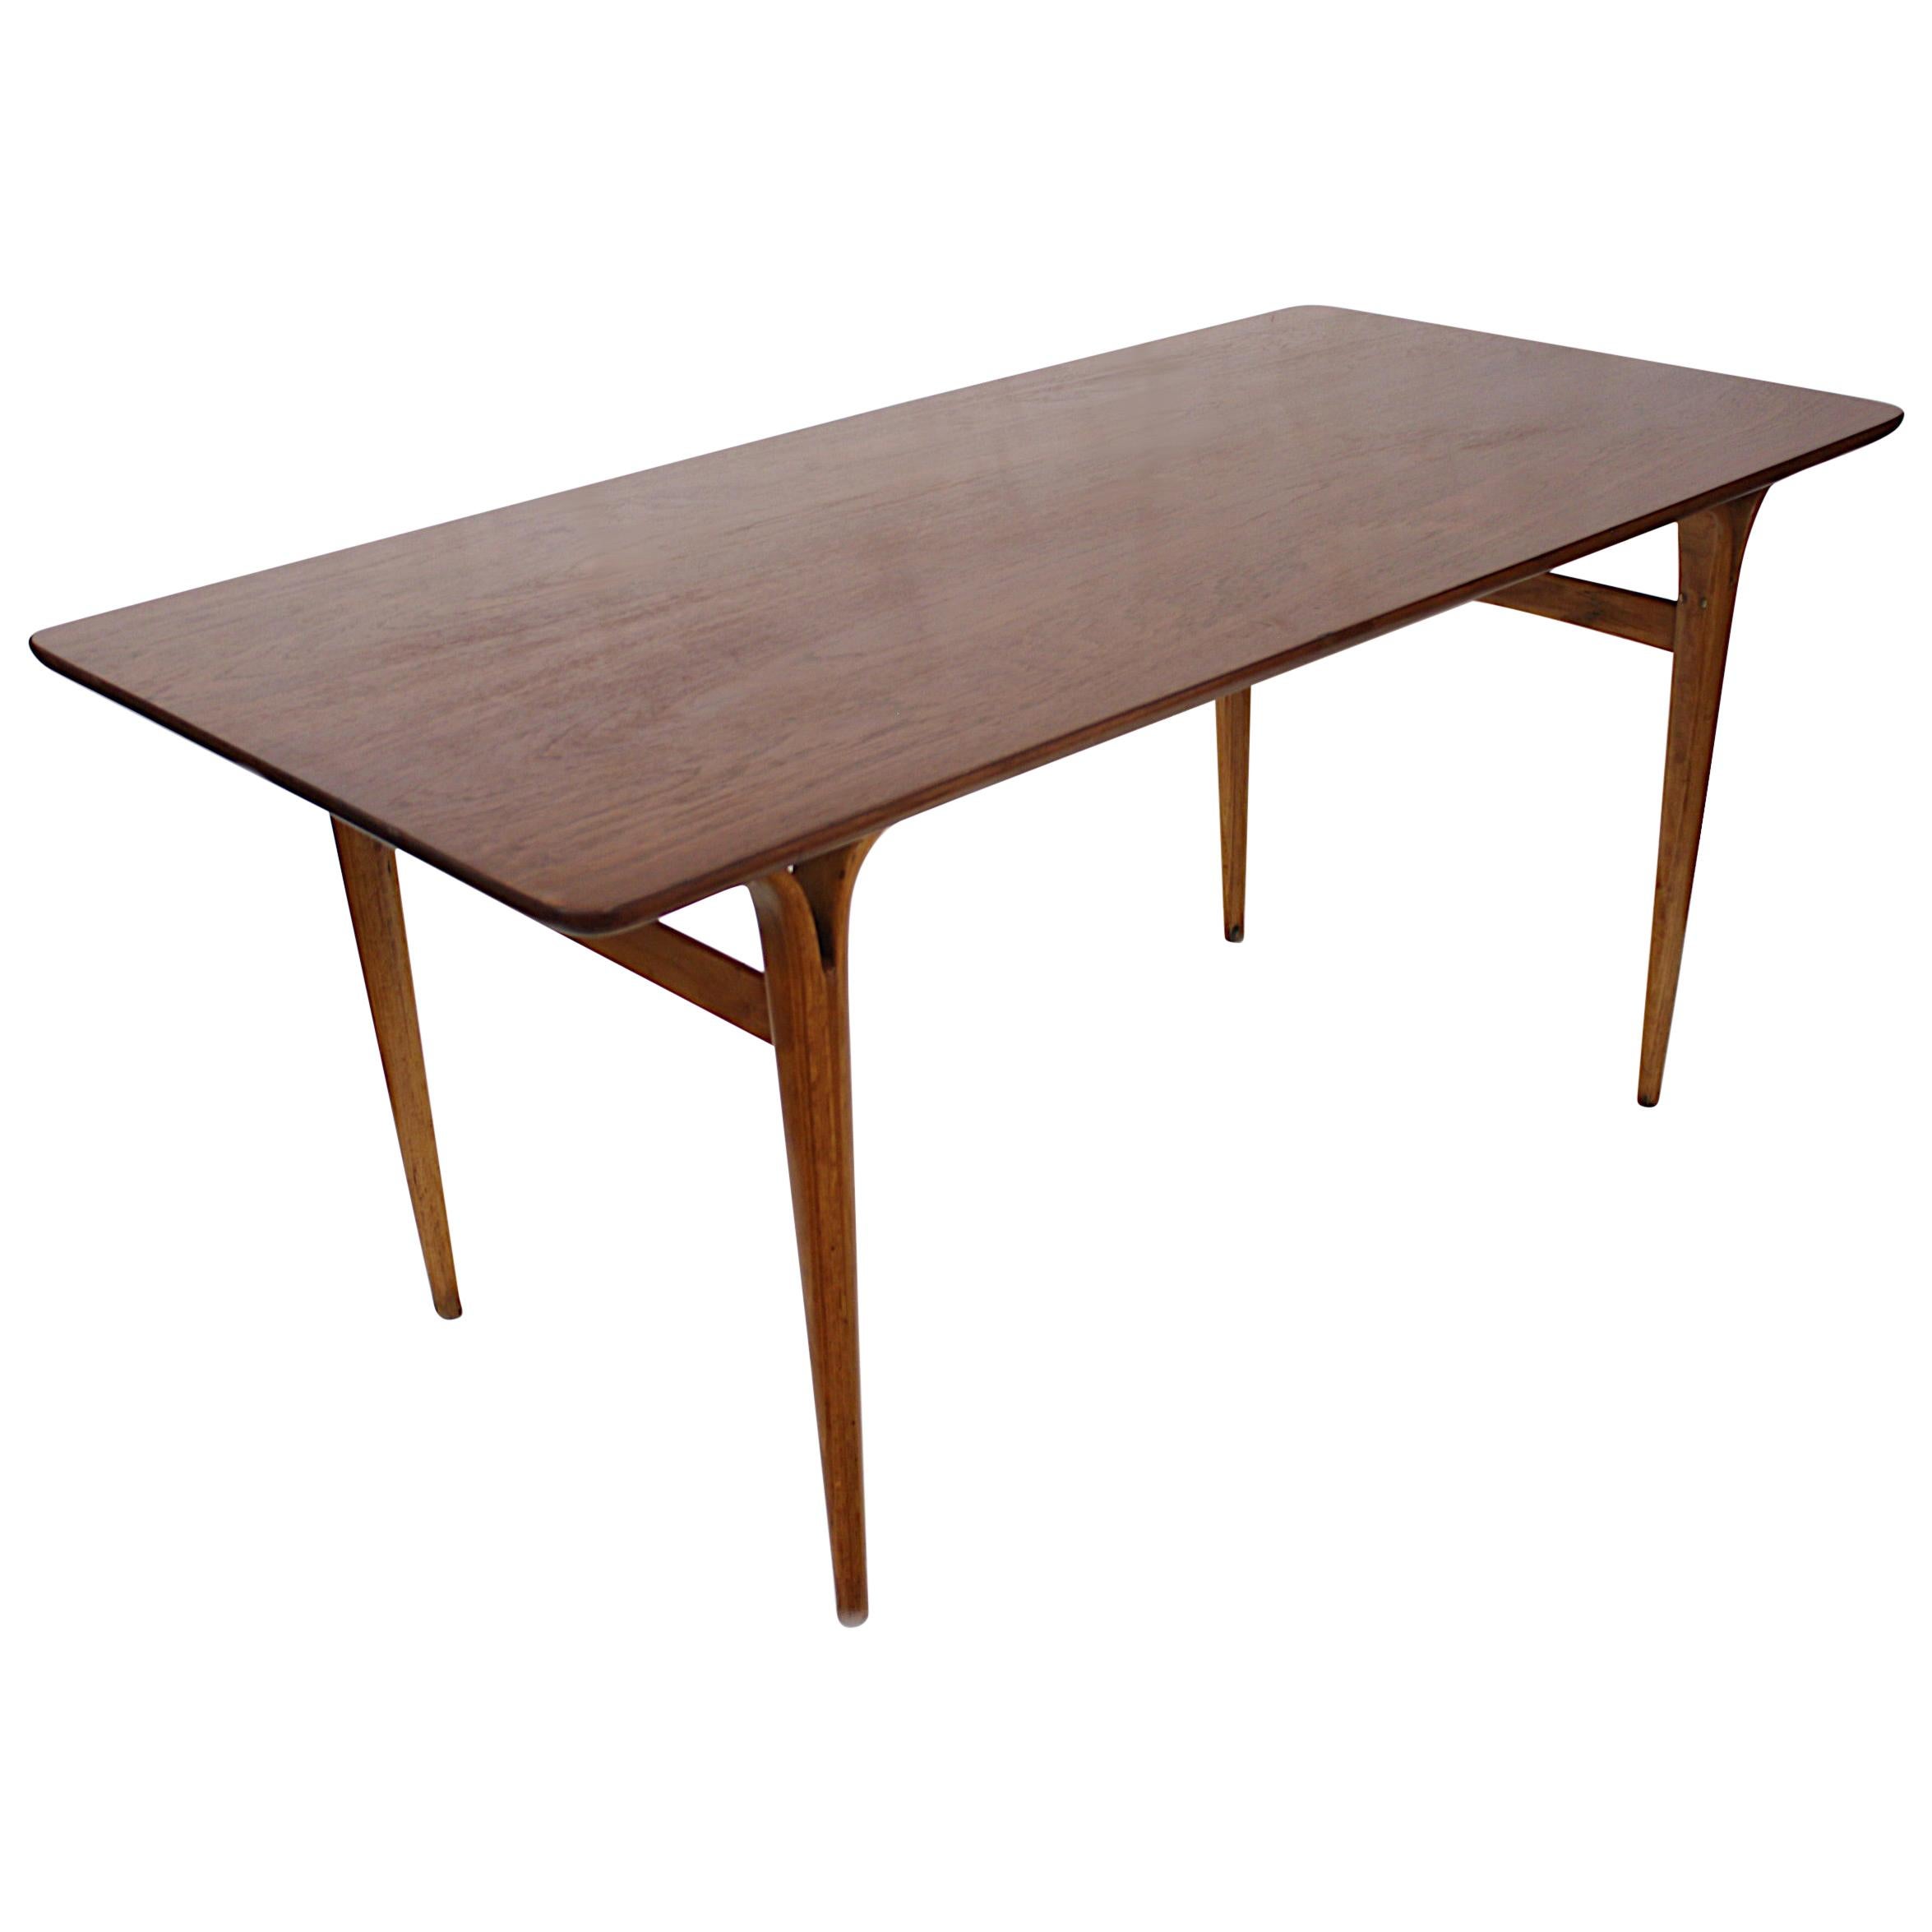 1950s Mid-Century Modern Teak and Beech Table with Cleft Legs by Bruno Mathsson